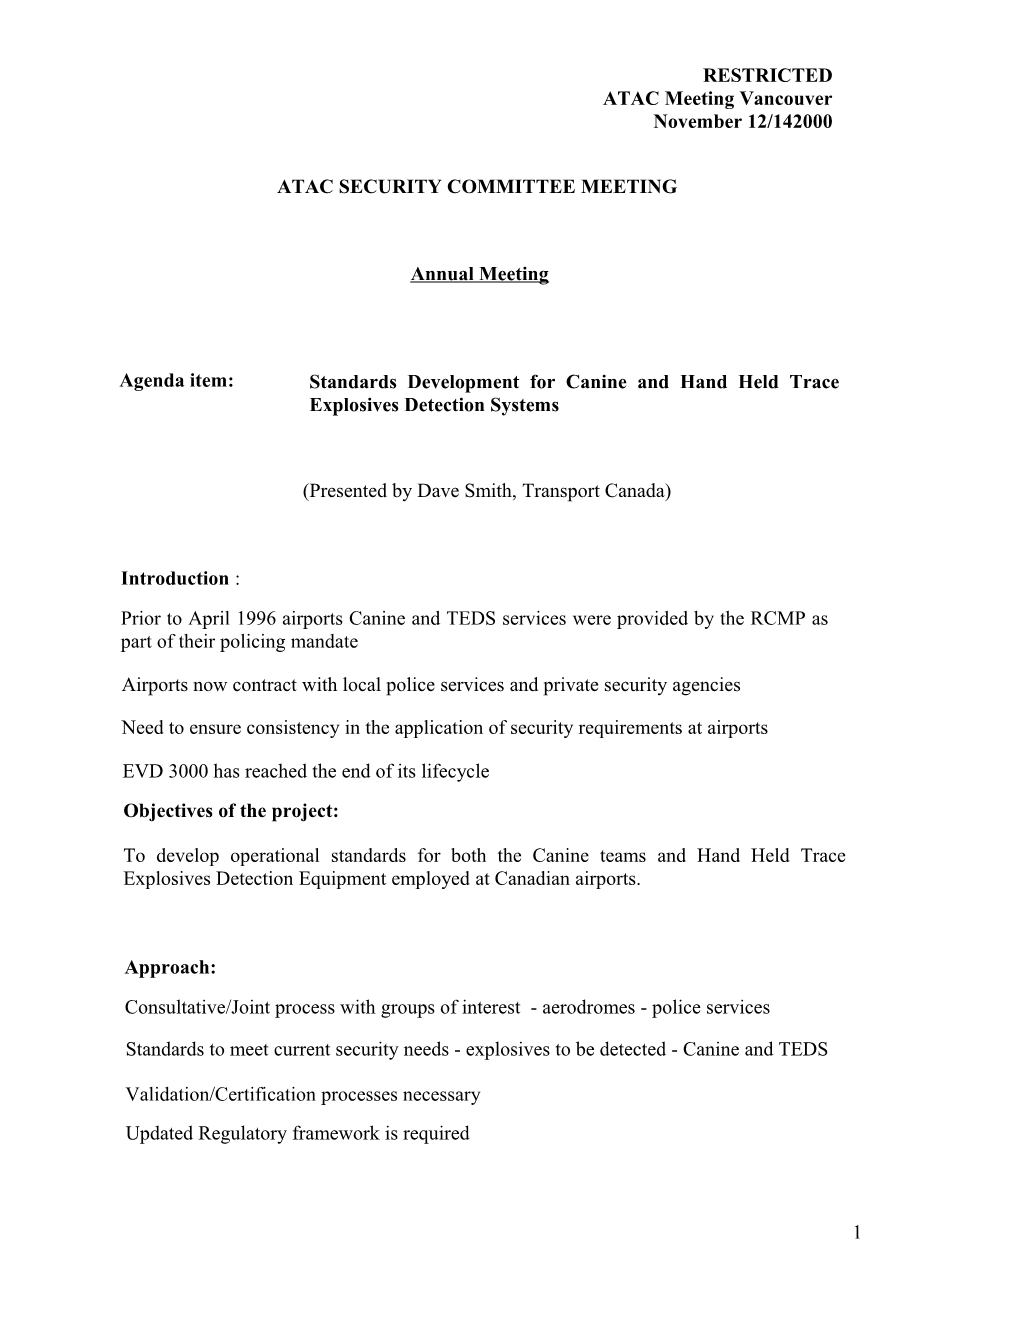 RESTRICTED ATAC Meeting Vancouver November 12/142000